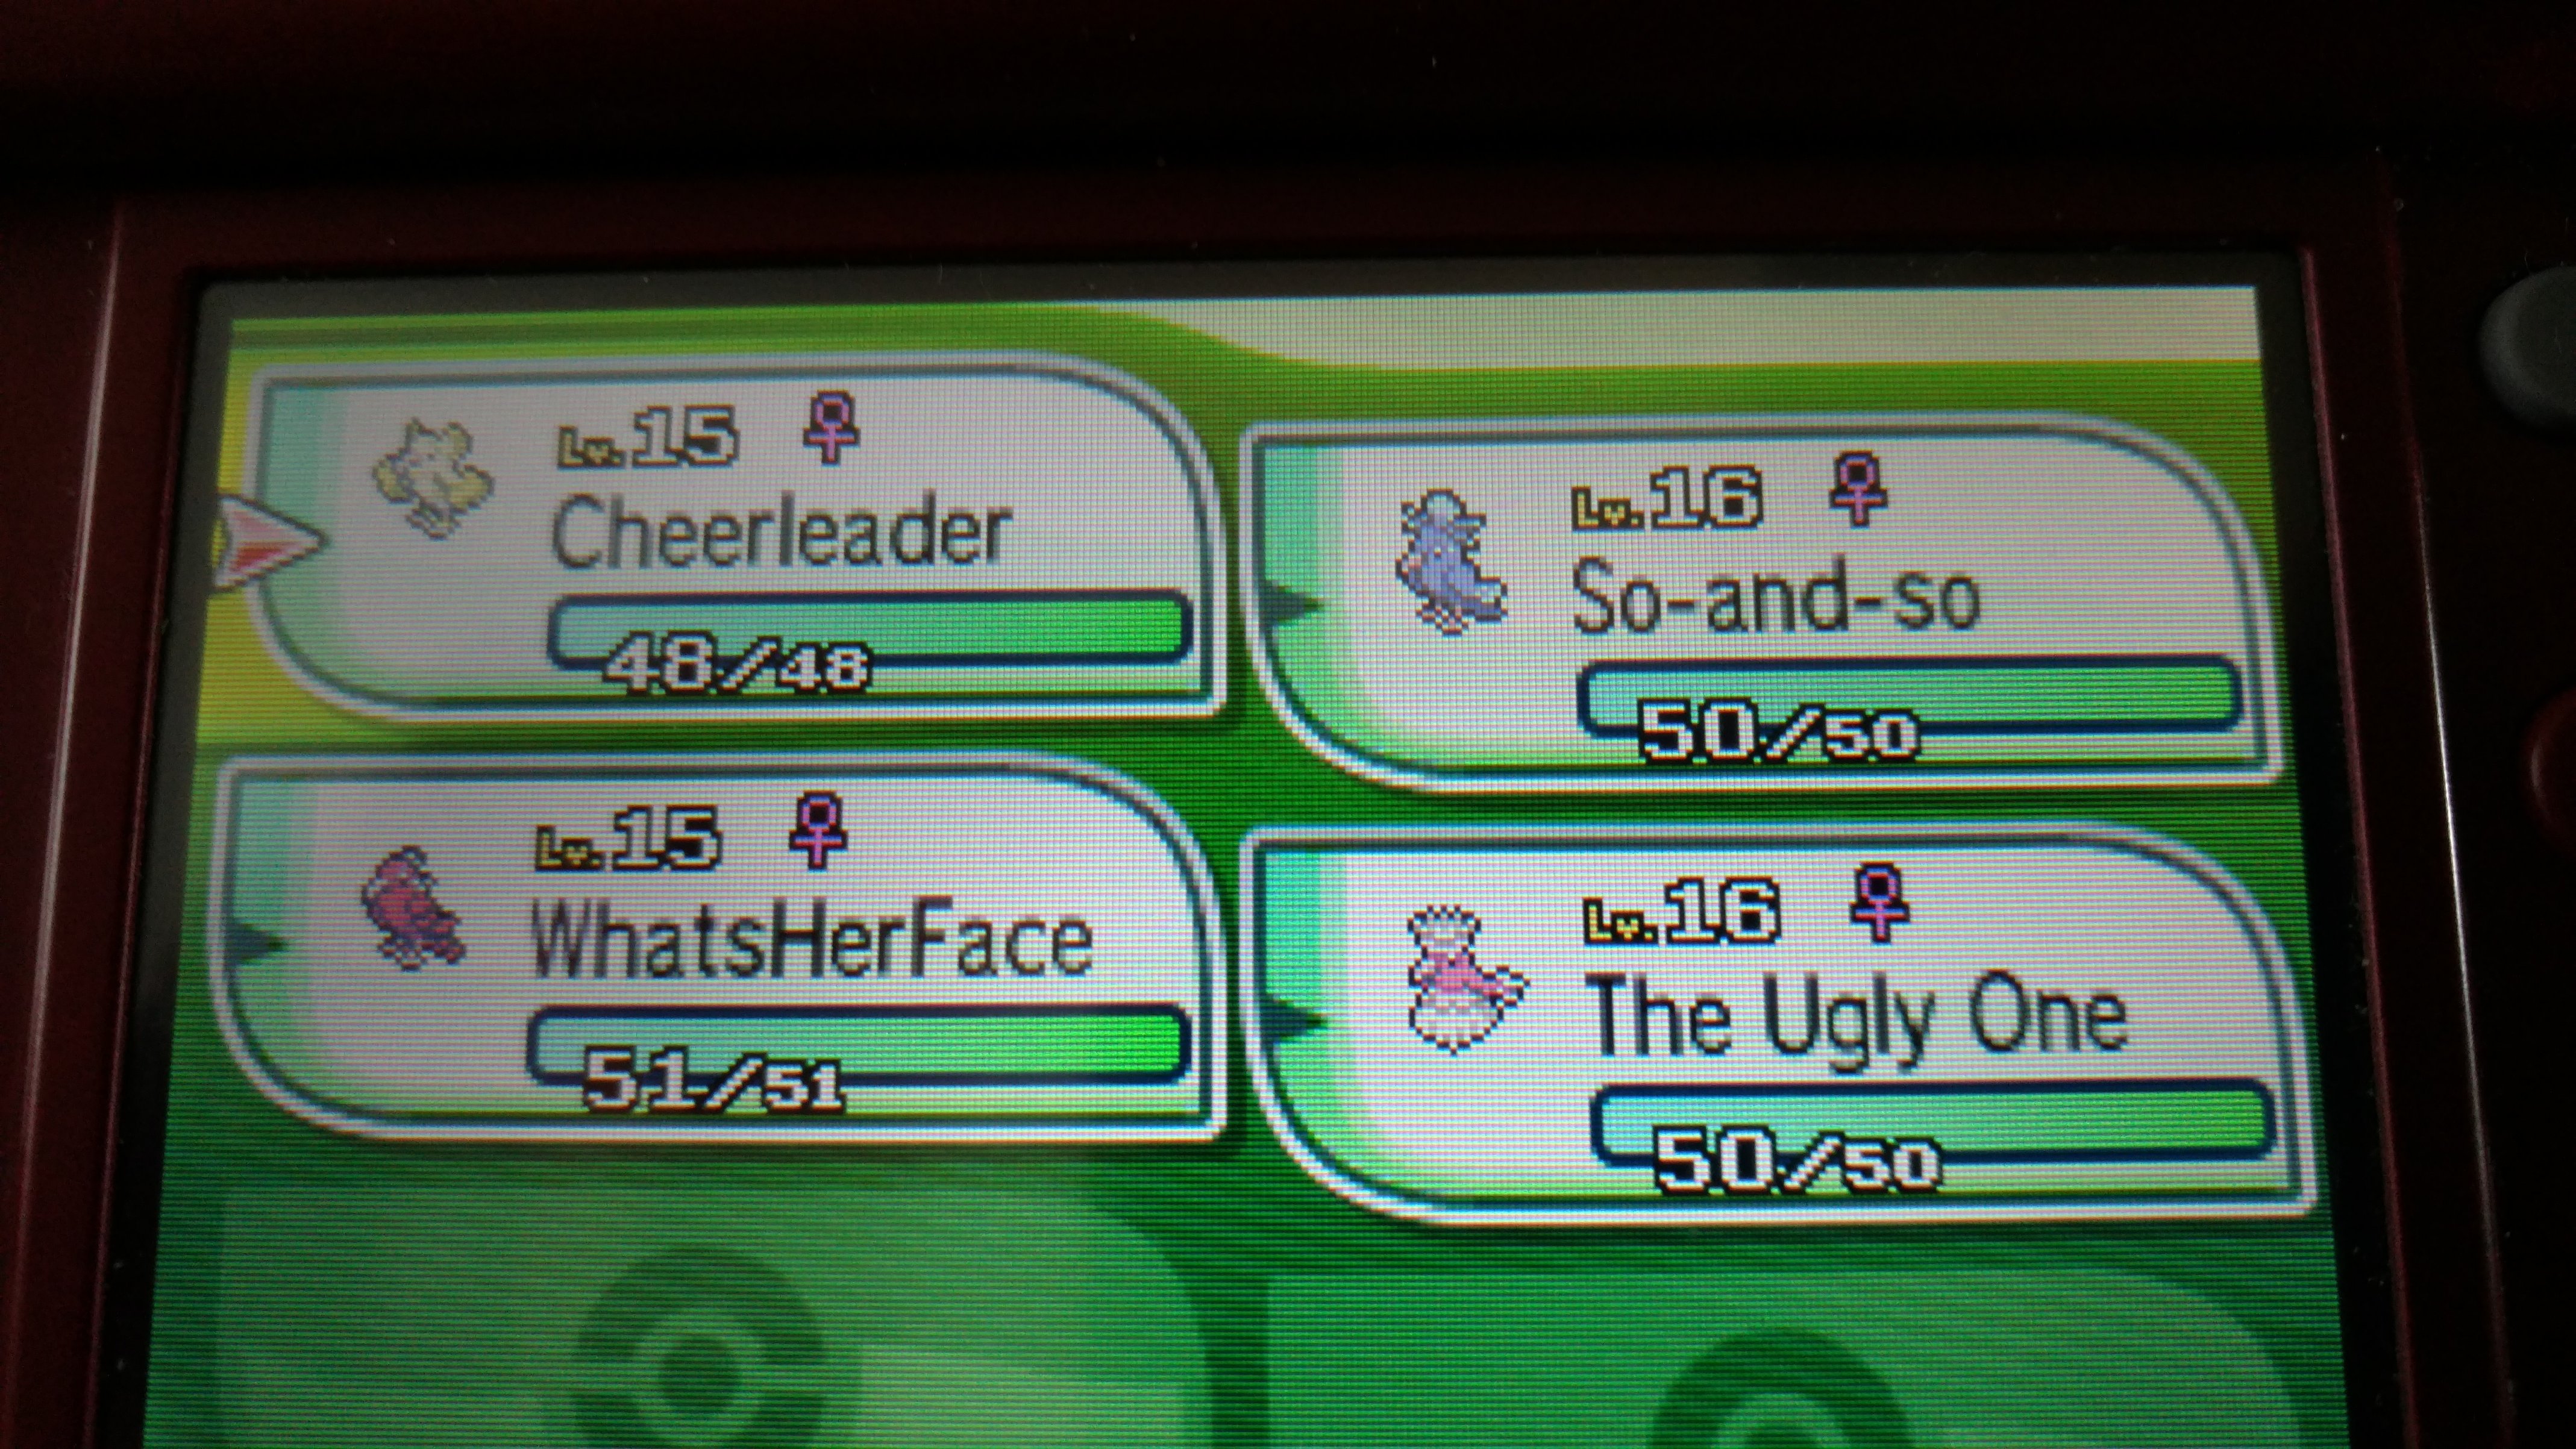 Pokémon - 15 Cheerleader 4848 L.16 Soandso 5050 6.15 WhatsHerface 51251 1.16 4 The Ugly One 50250